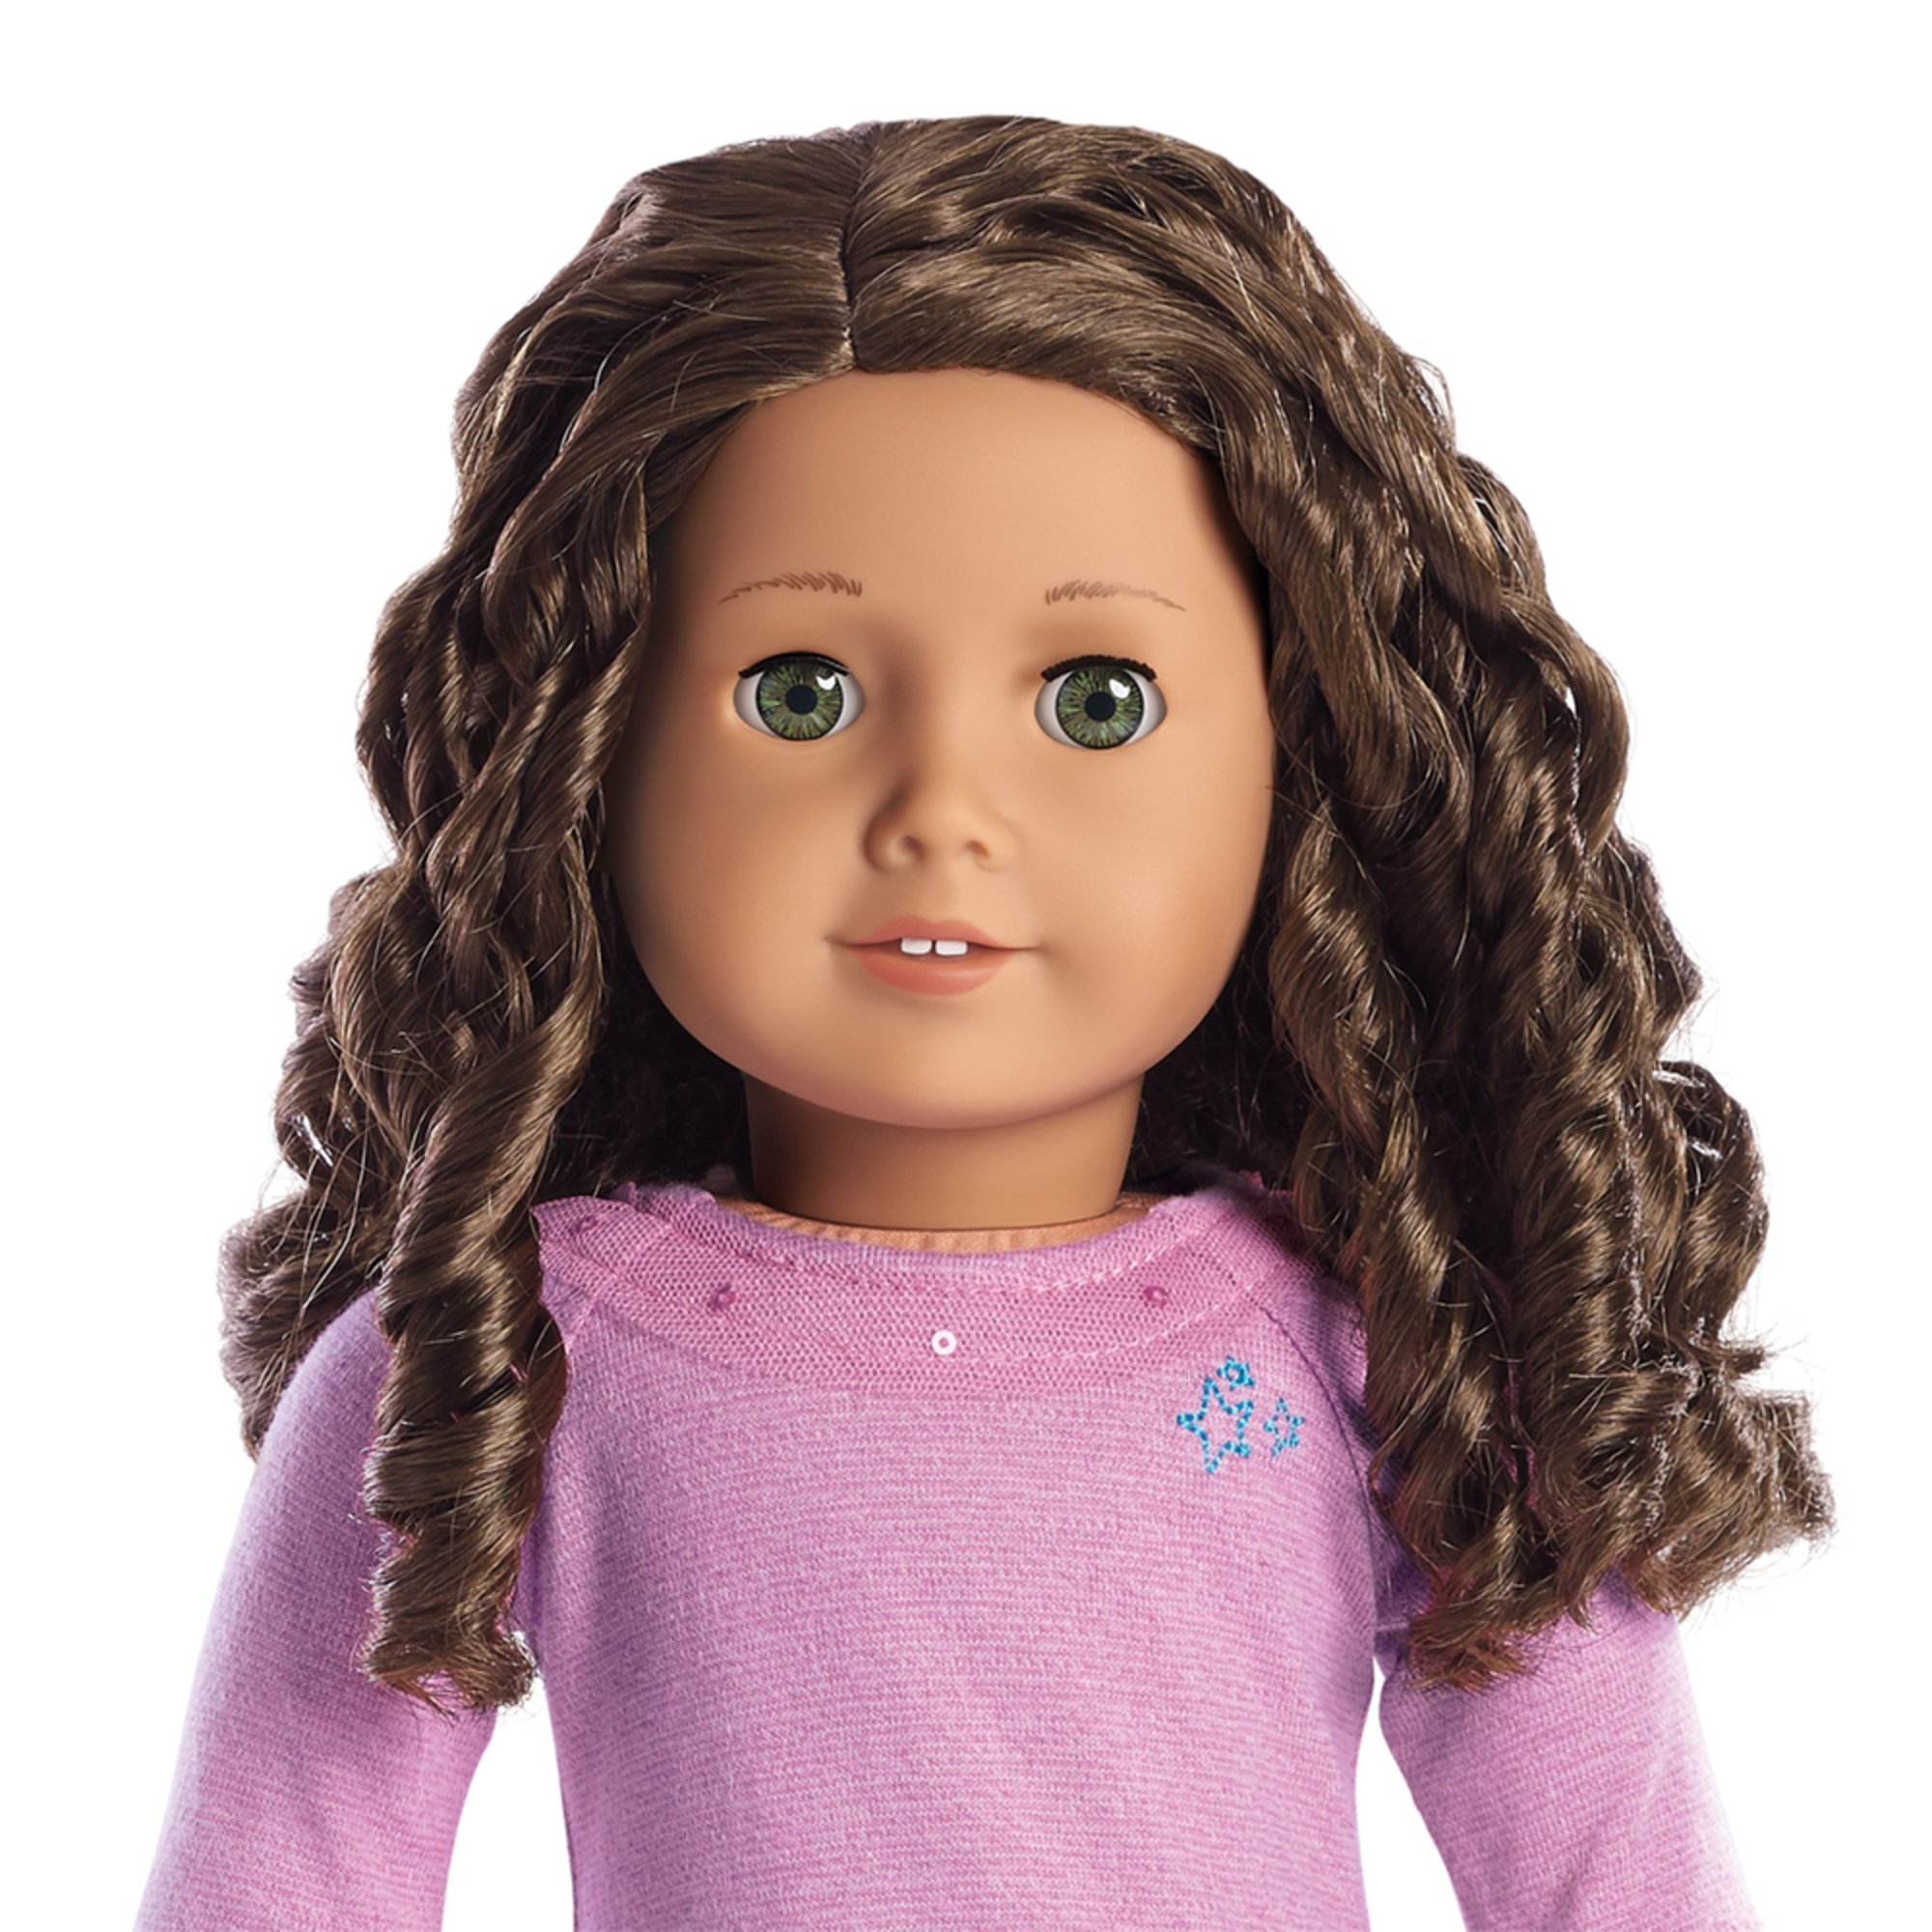 19 Curly Hair American Girl Doll Hairstyles Important Ideas